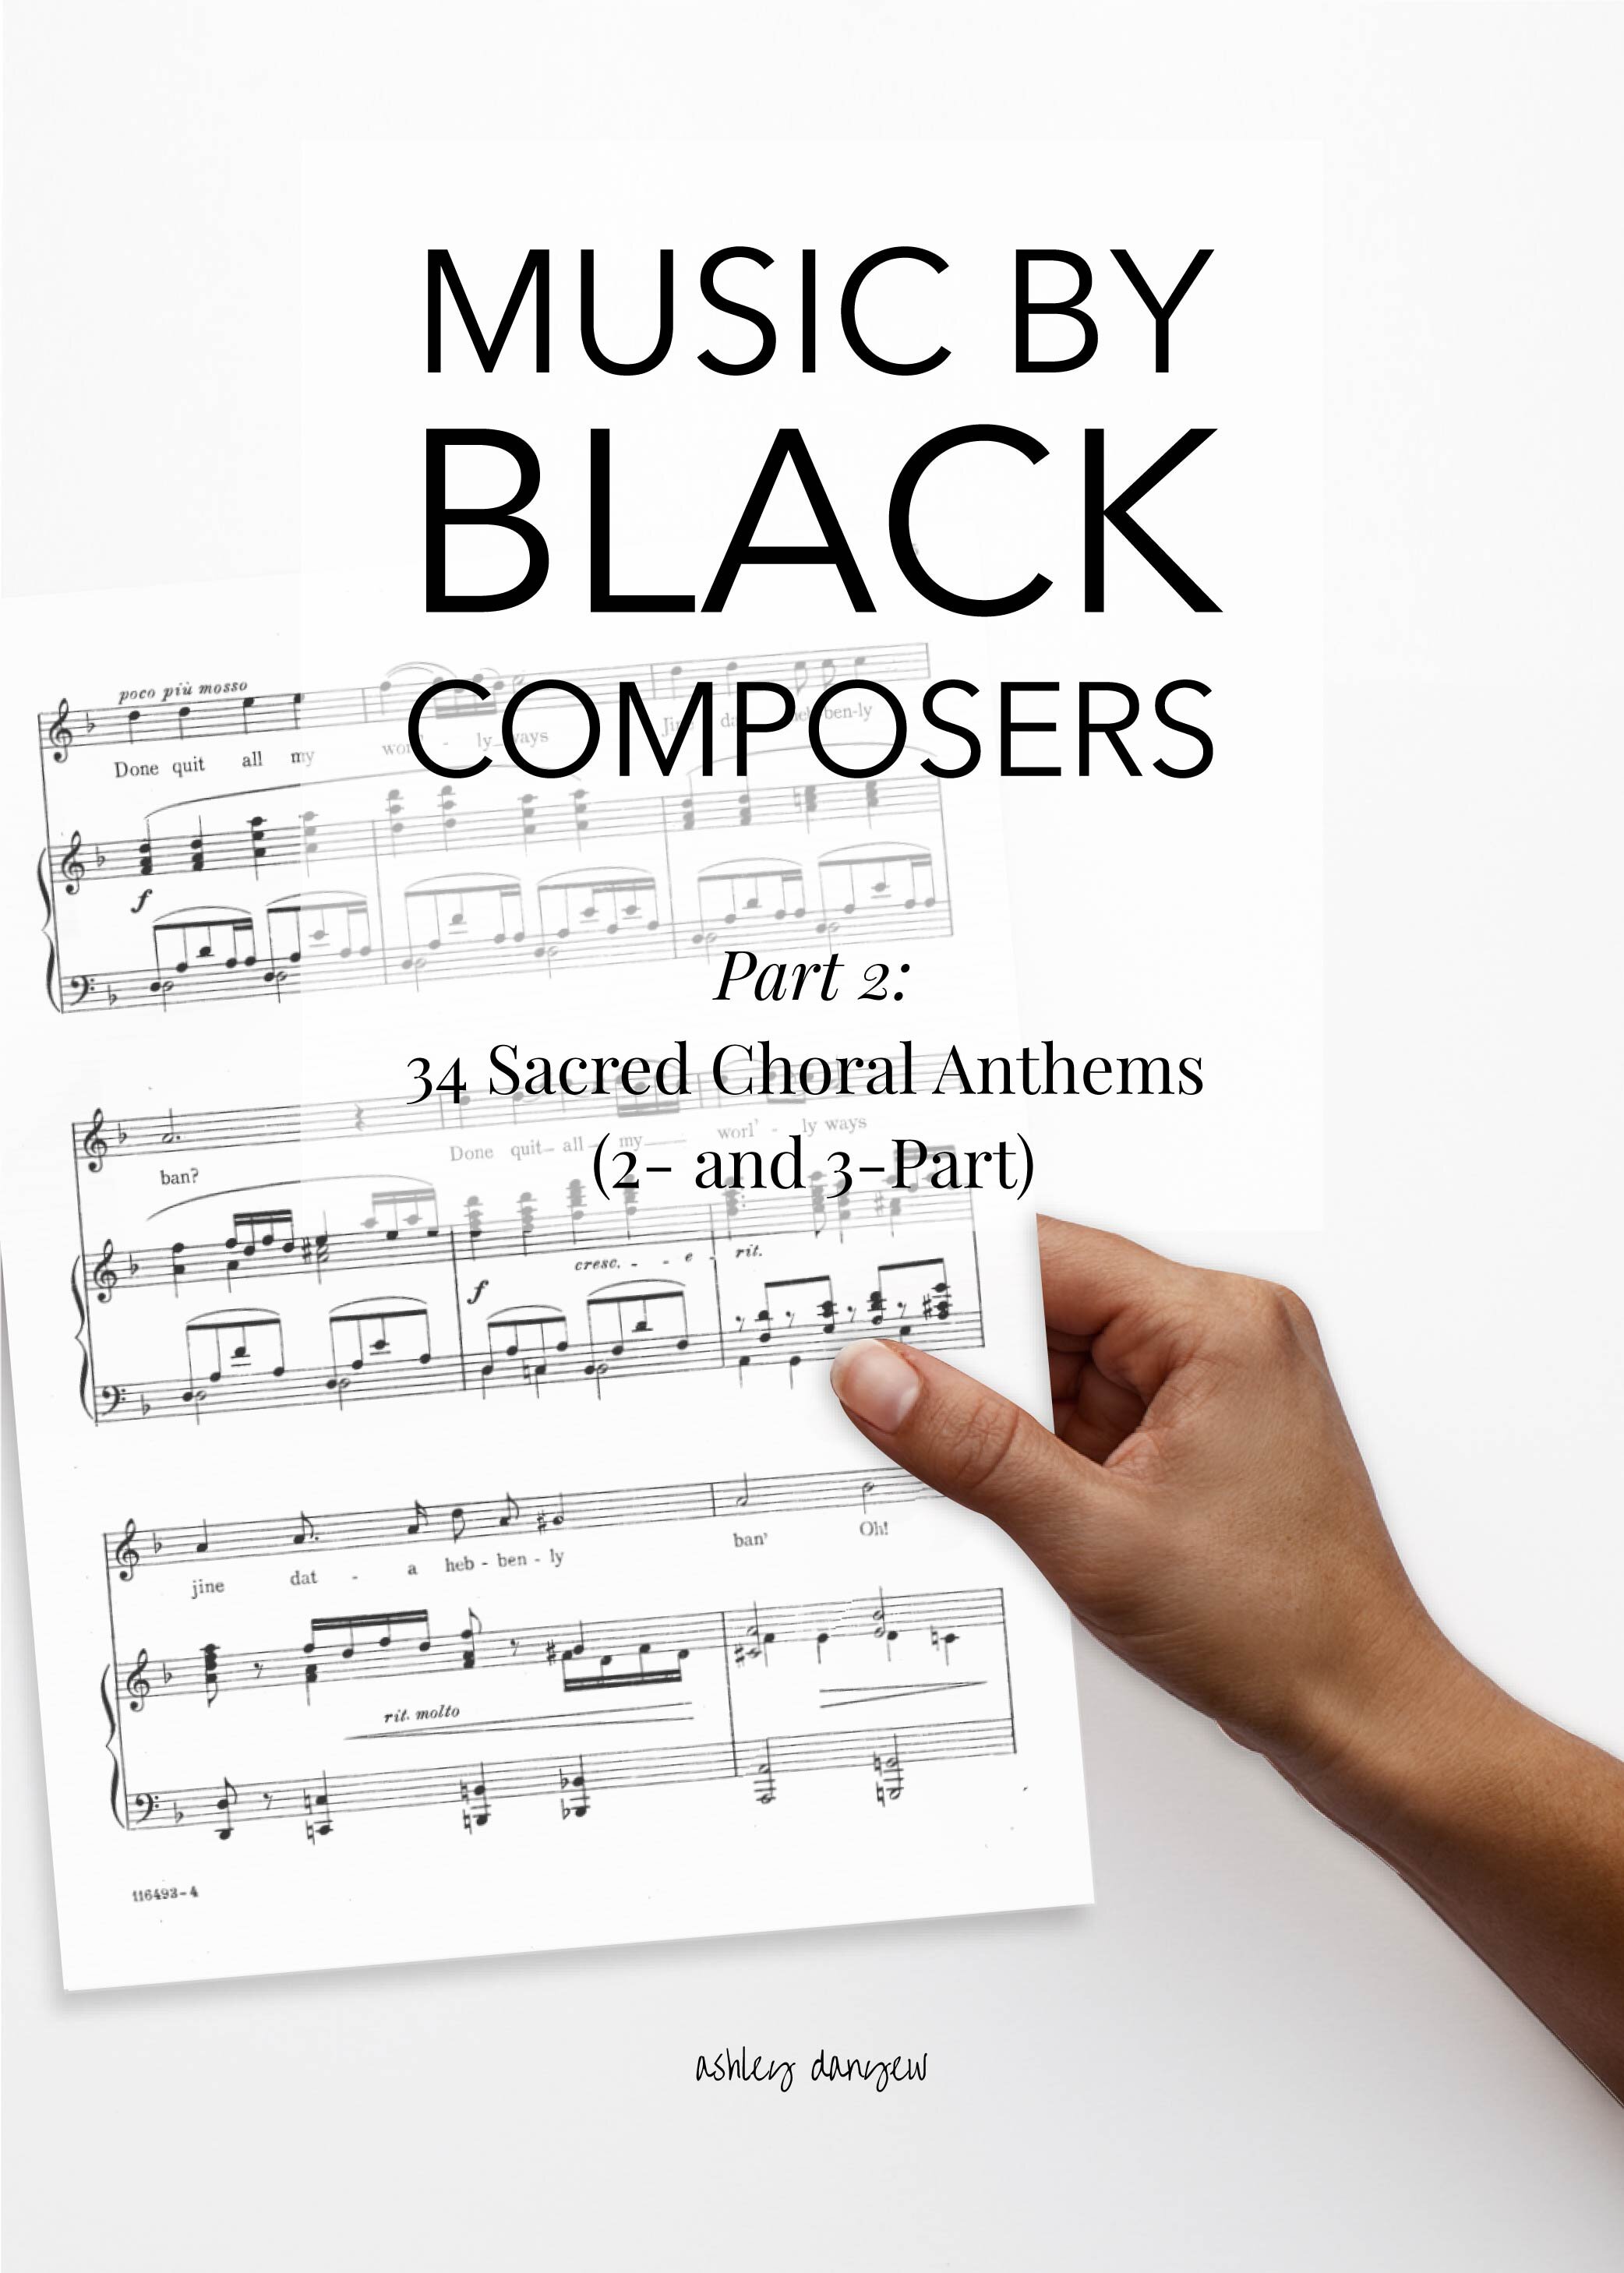 Music by Black Composers - Part 2 - 34 Sacred Choral Anthems (2- and 3-Part)-43.jpg